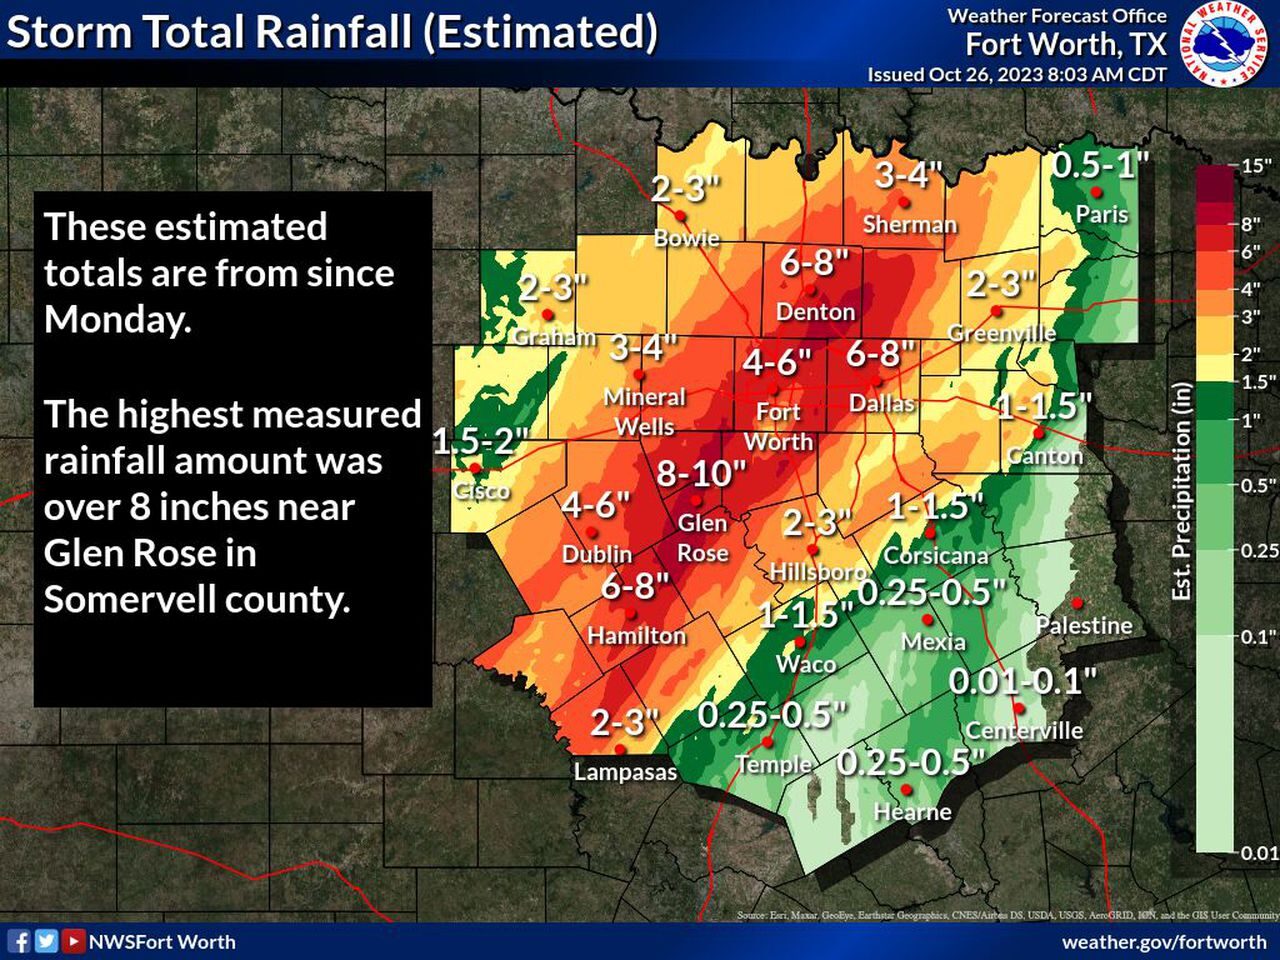 This graphic from the National Weather Service shows how much rain fell in North Texas between Monday, Oct. 23, and Thursday, Oct. 26. Glen Rose was especially hard hit with over 8 inches of rain.